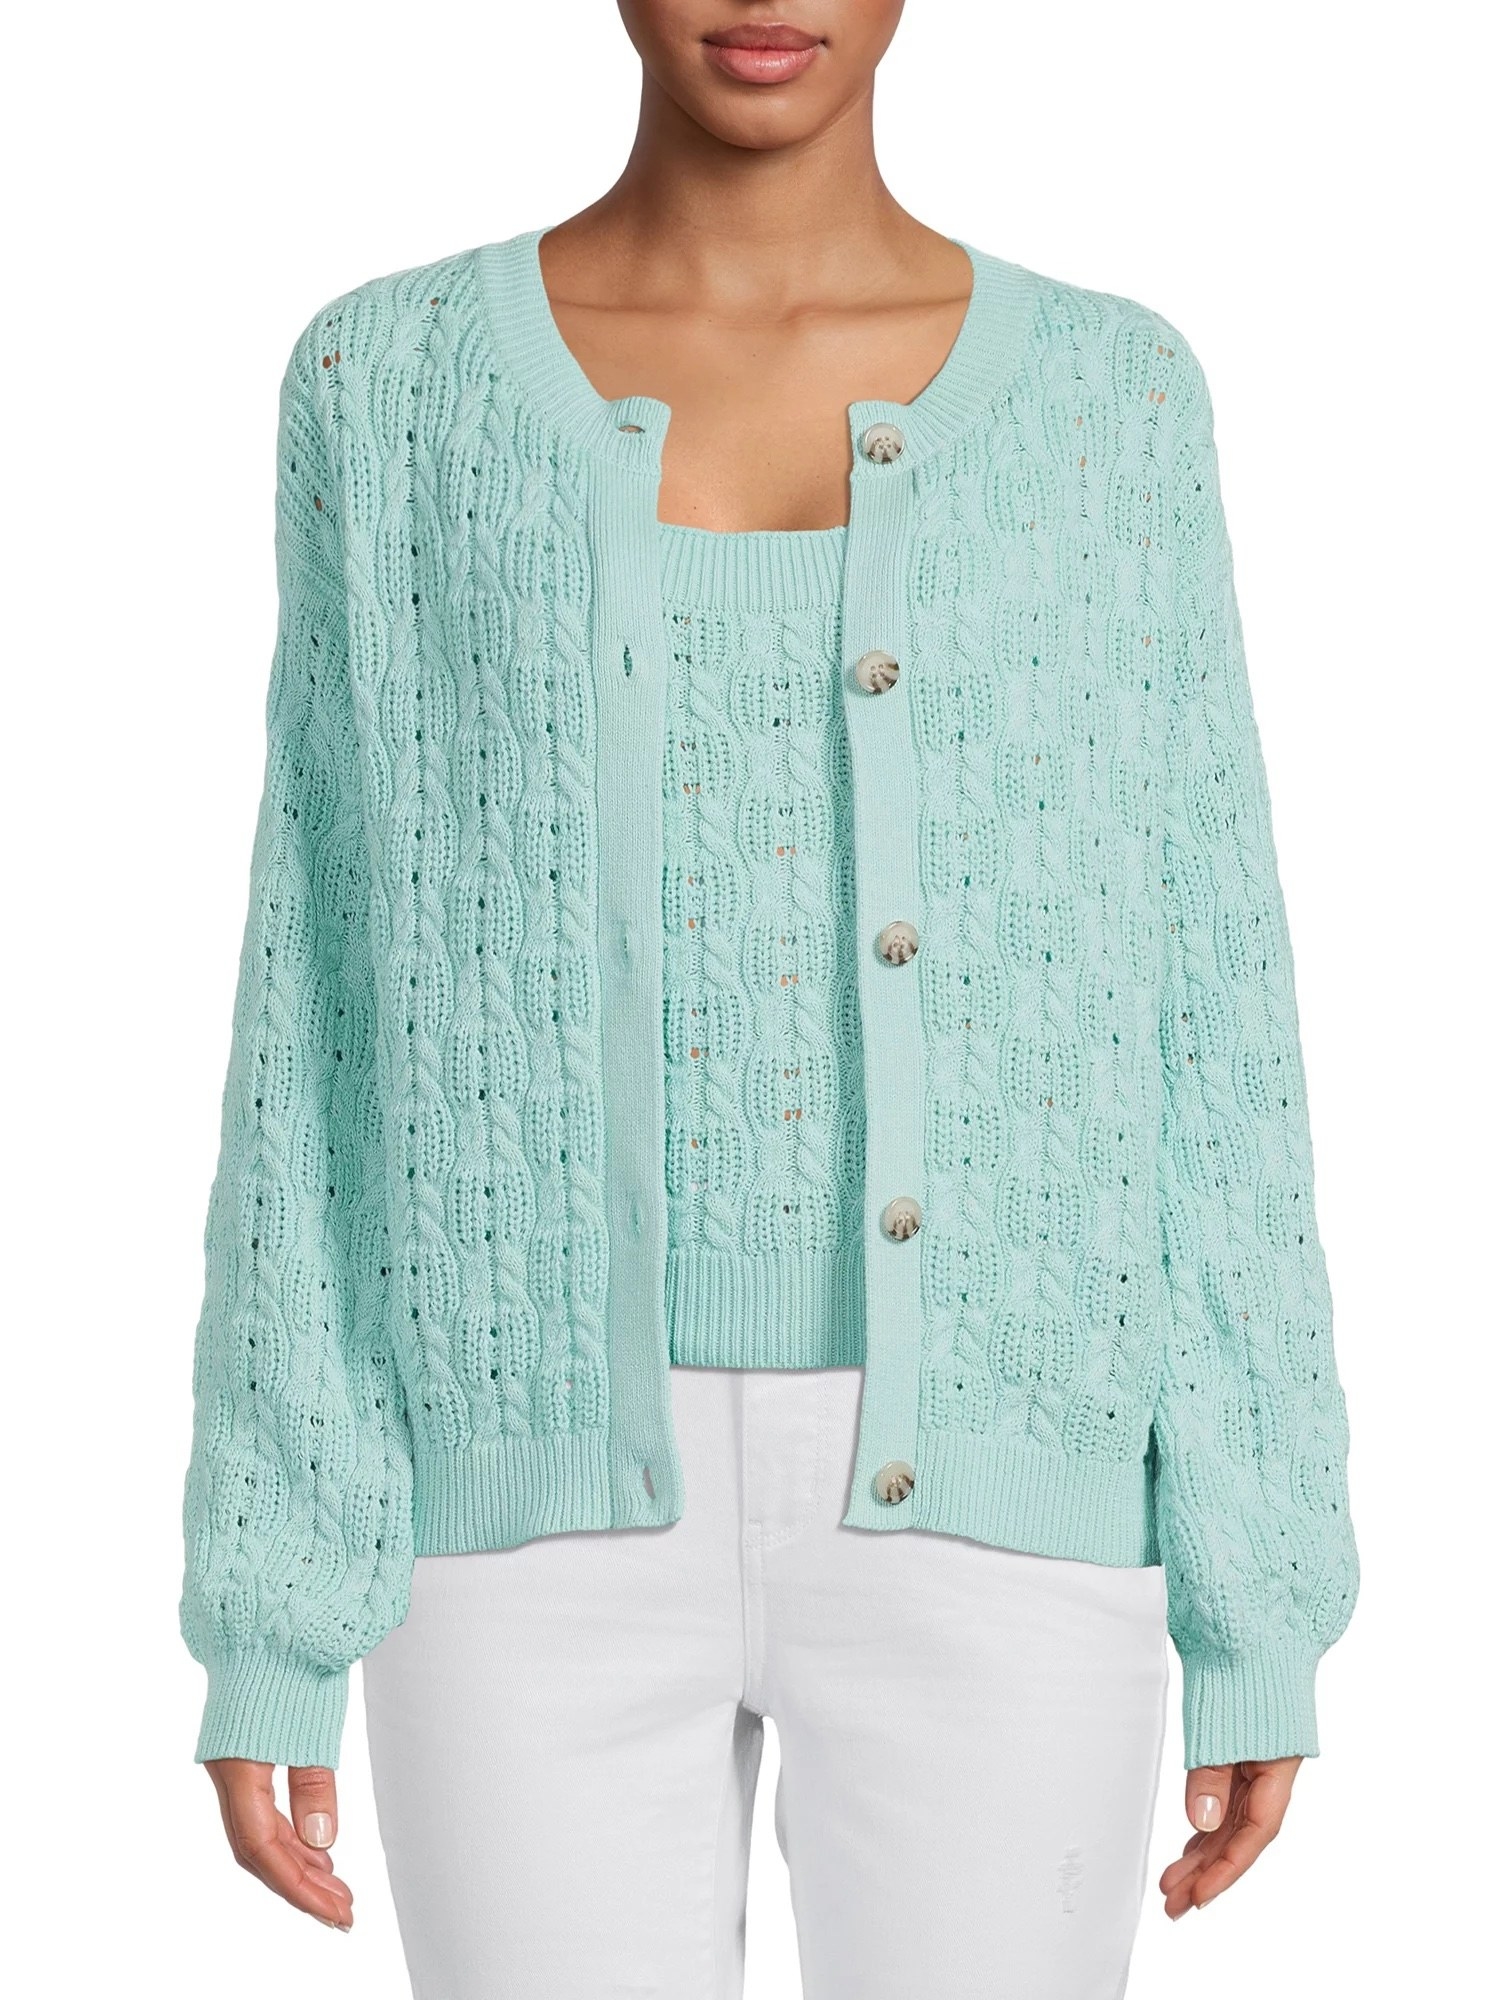 Model wearing mint green top with matching sweater and white jeans